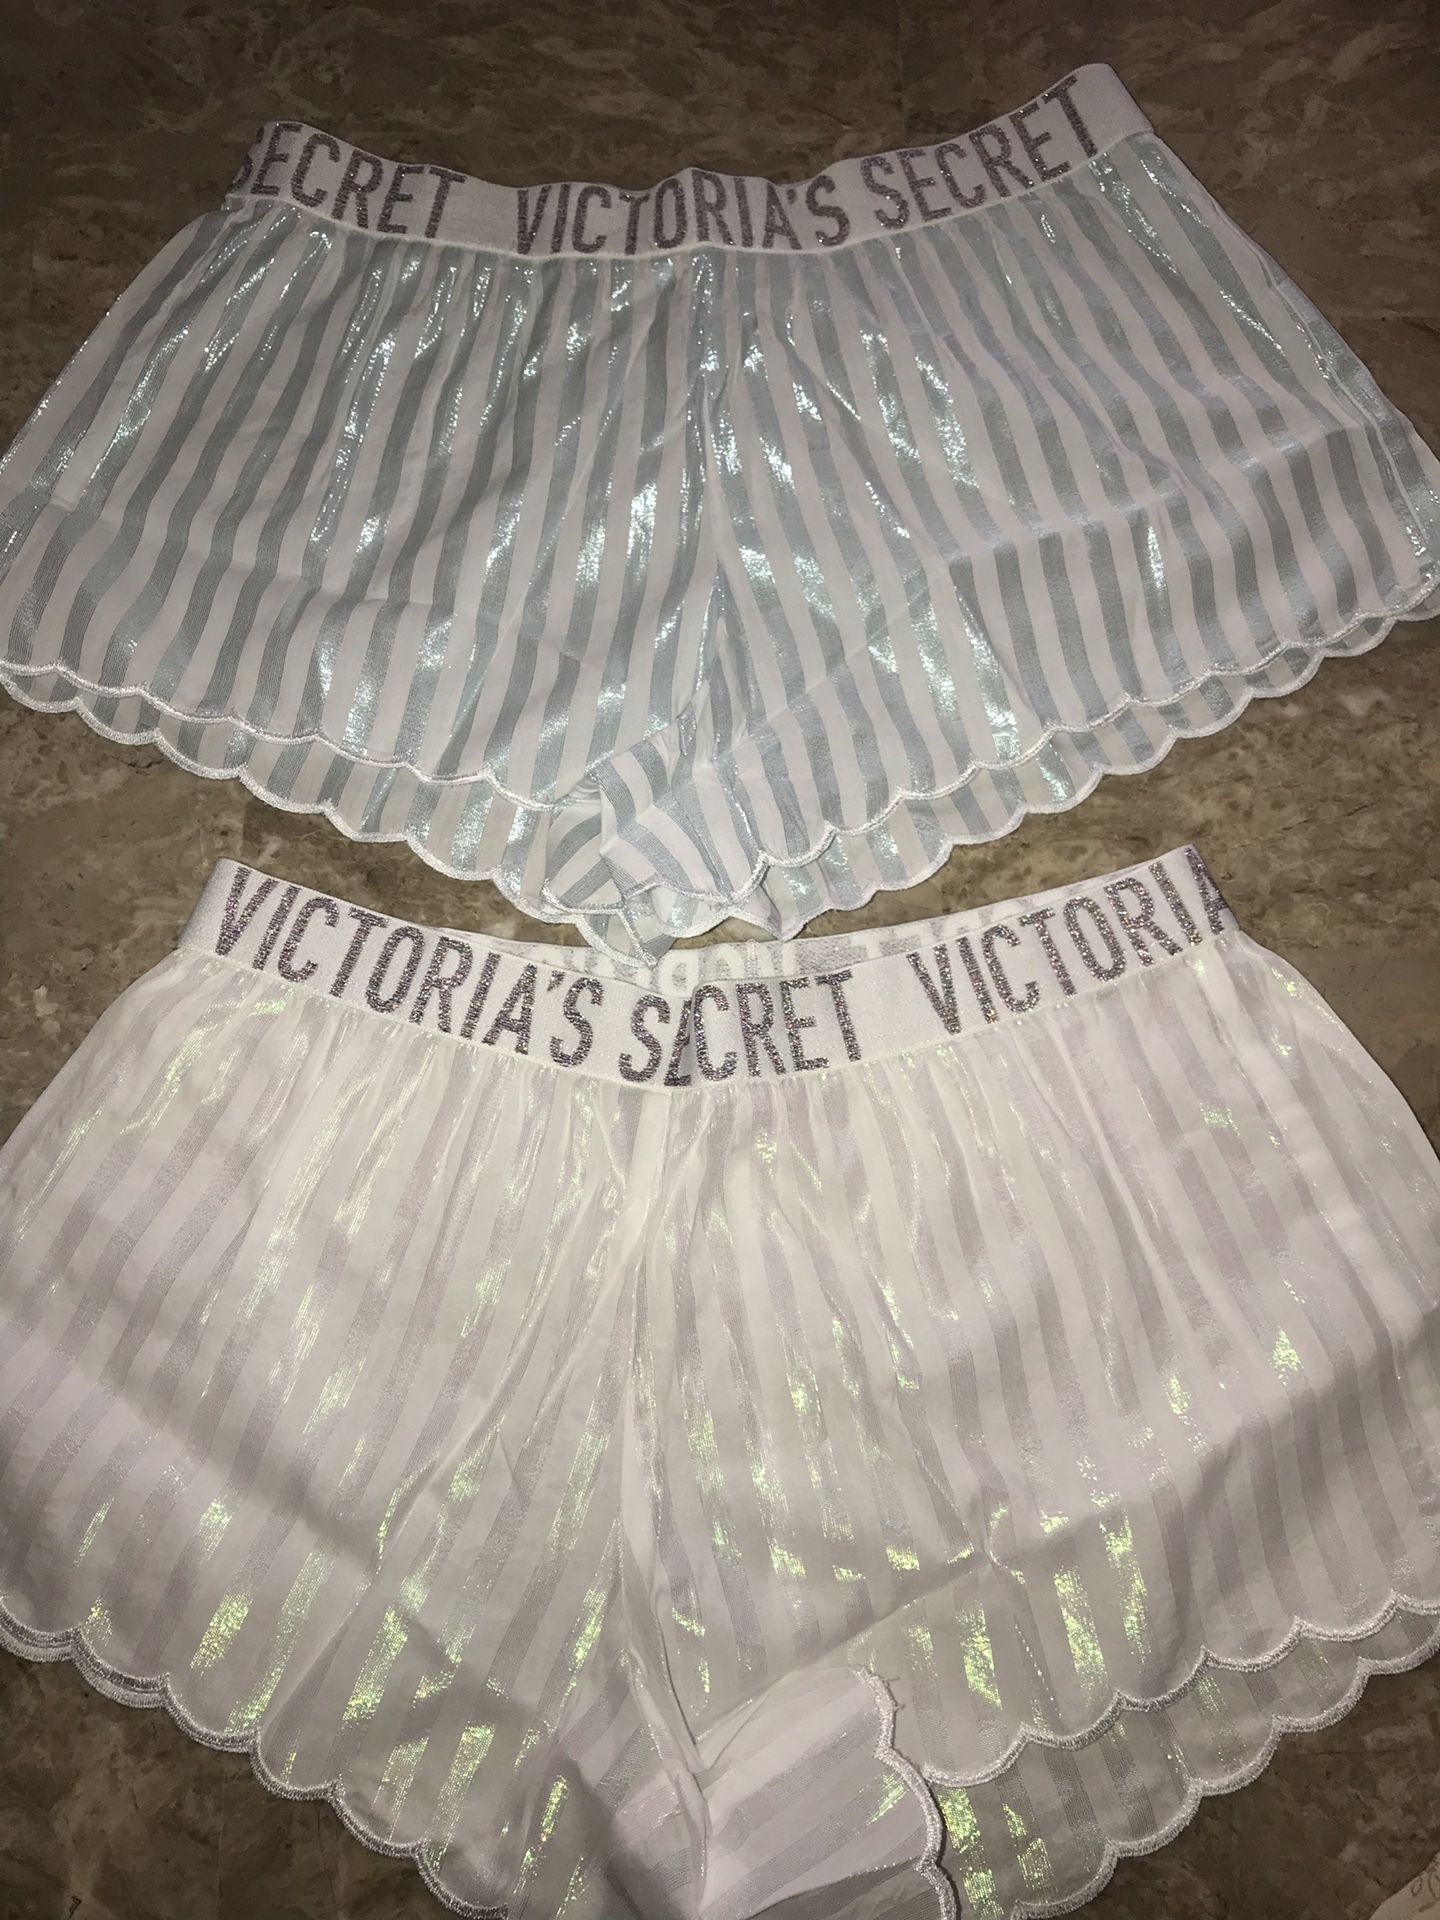 Victoria’s Secret pijama shorts Small and XS Brand New,$10 each price is firm